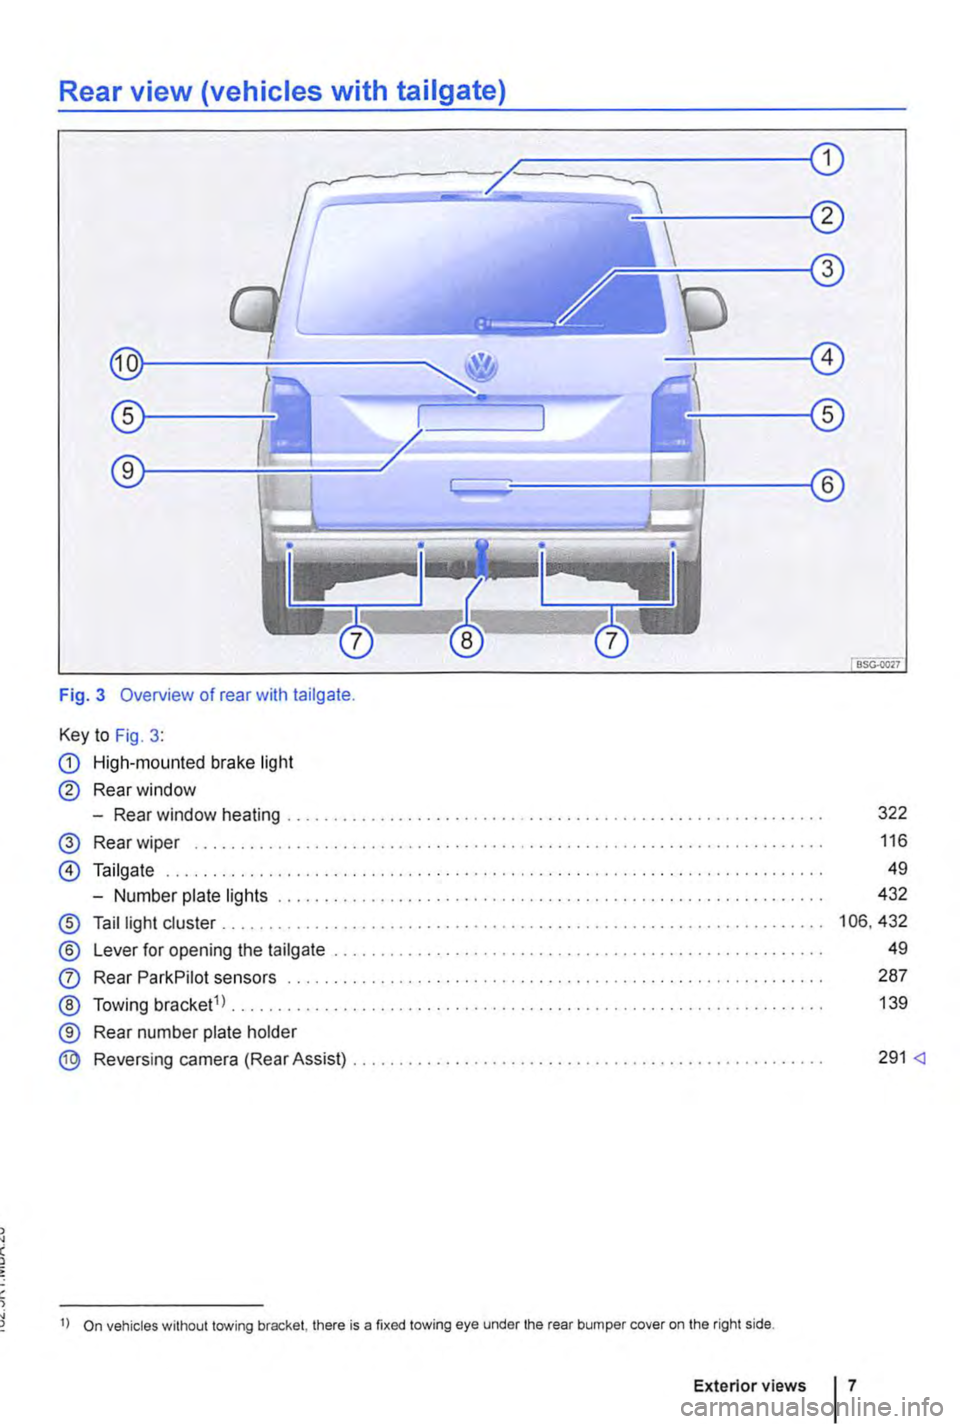 VOLKSWAGEN TRANSPORTER 2020  Owners Manual Rear view (vehicles with tailgate) 
Fig. 3 Overview of rear with tailgate. 
Key to Fig. 3: 
CD High-mounted brake light 
@ Rear window 
-Rear window heating ........................ . 
@ Rear wiper ..